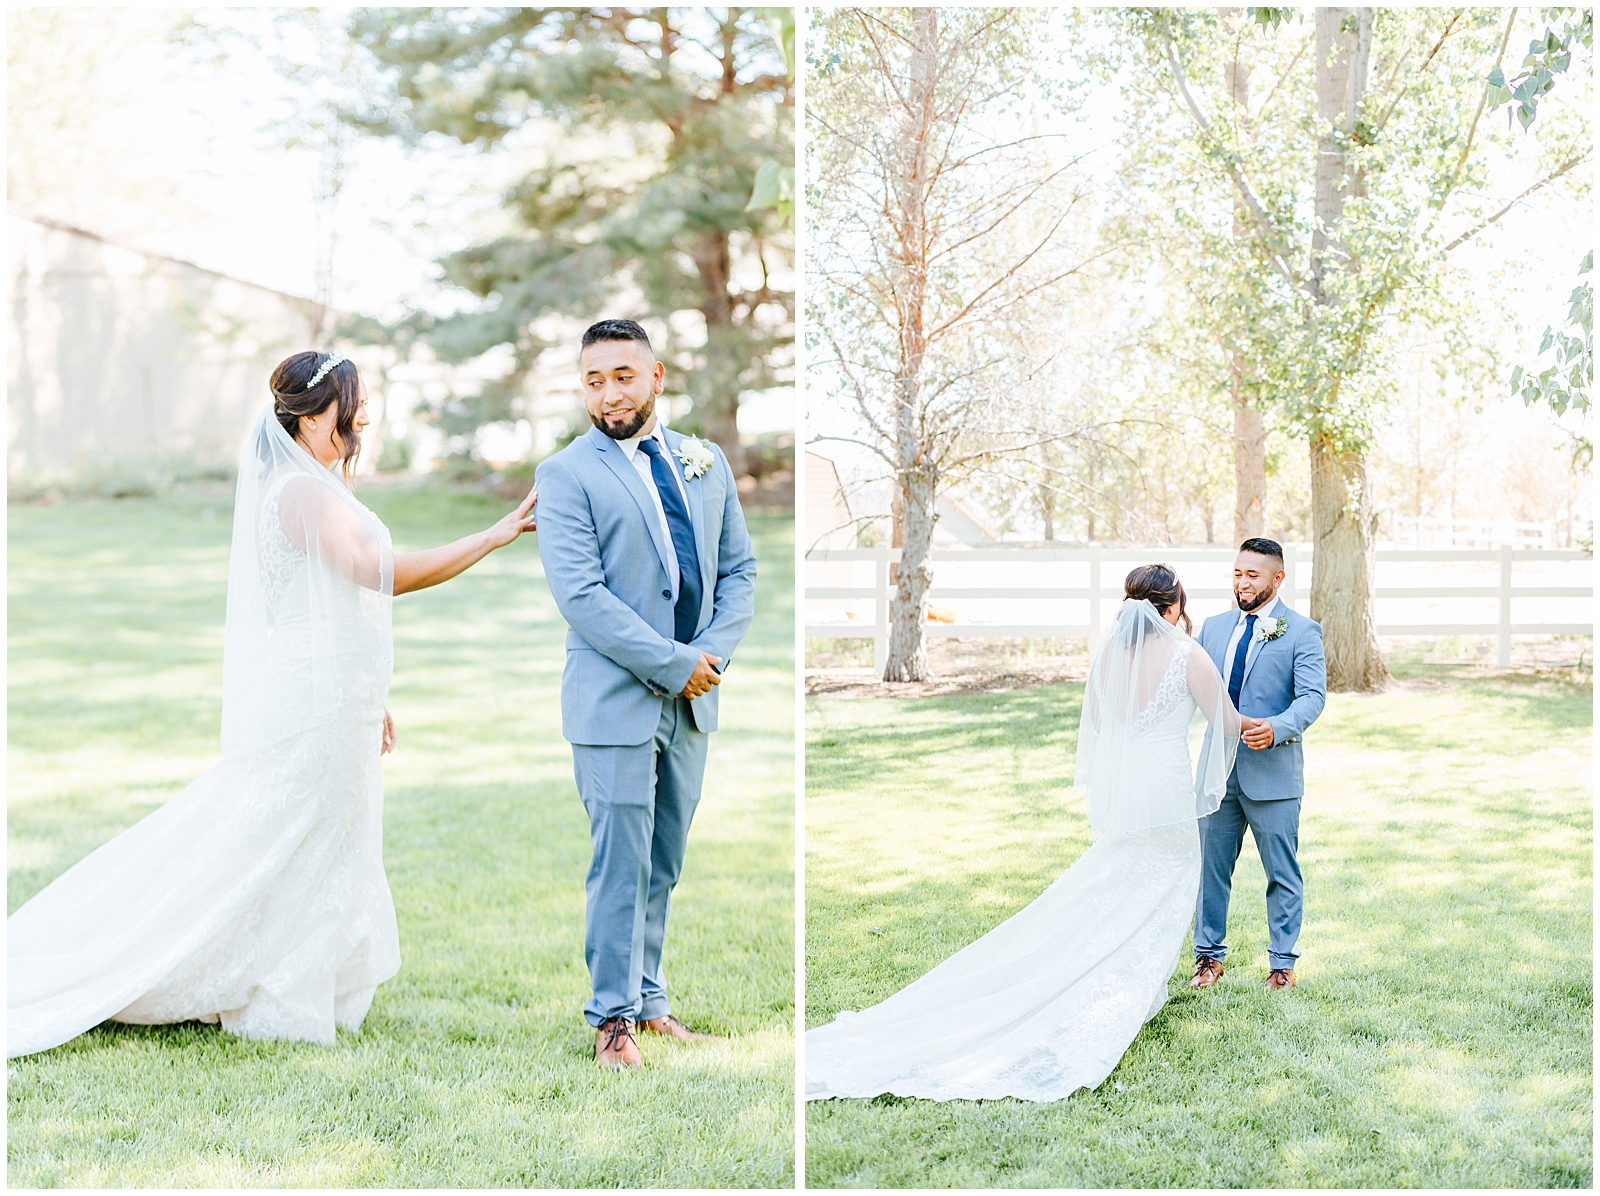 Bride and Groom's First Look at Dusty Blue Fox Canyon Vineyards Wedding